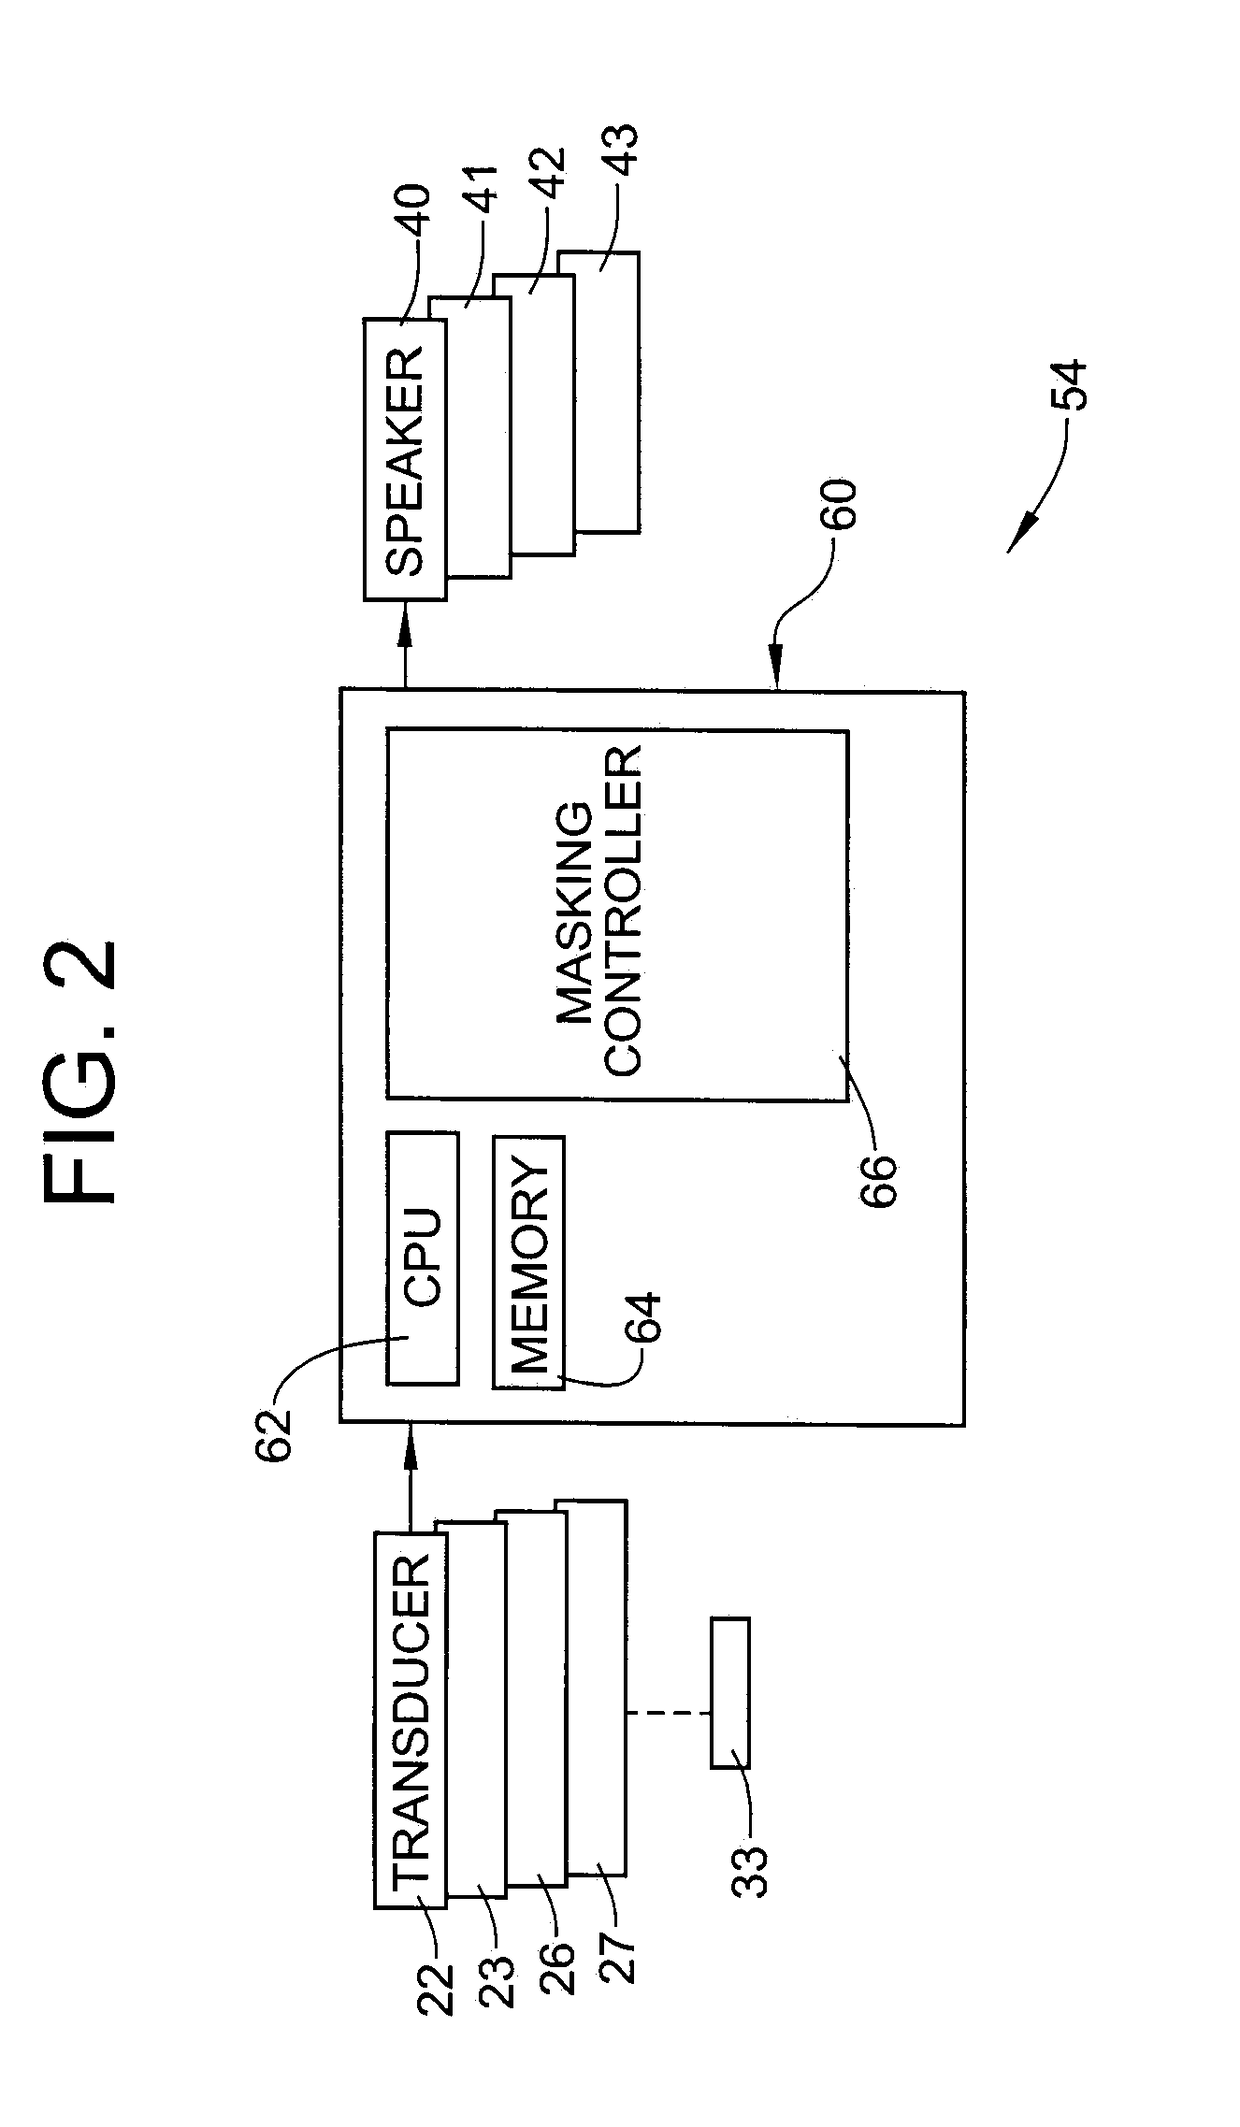 Road noise masking system for a vehicle